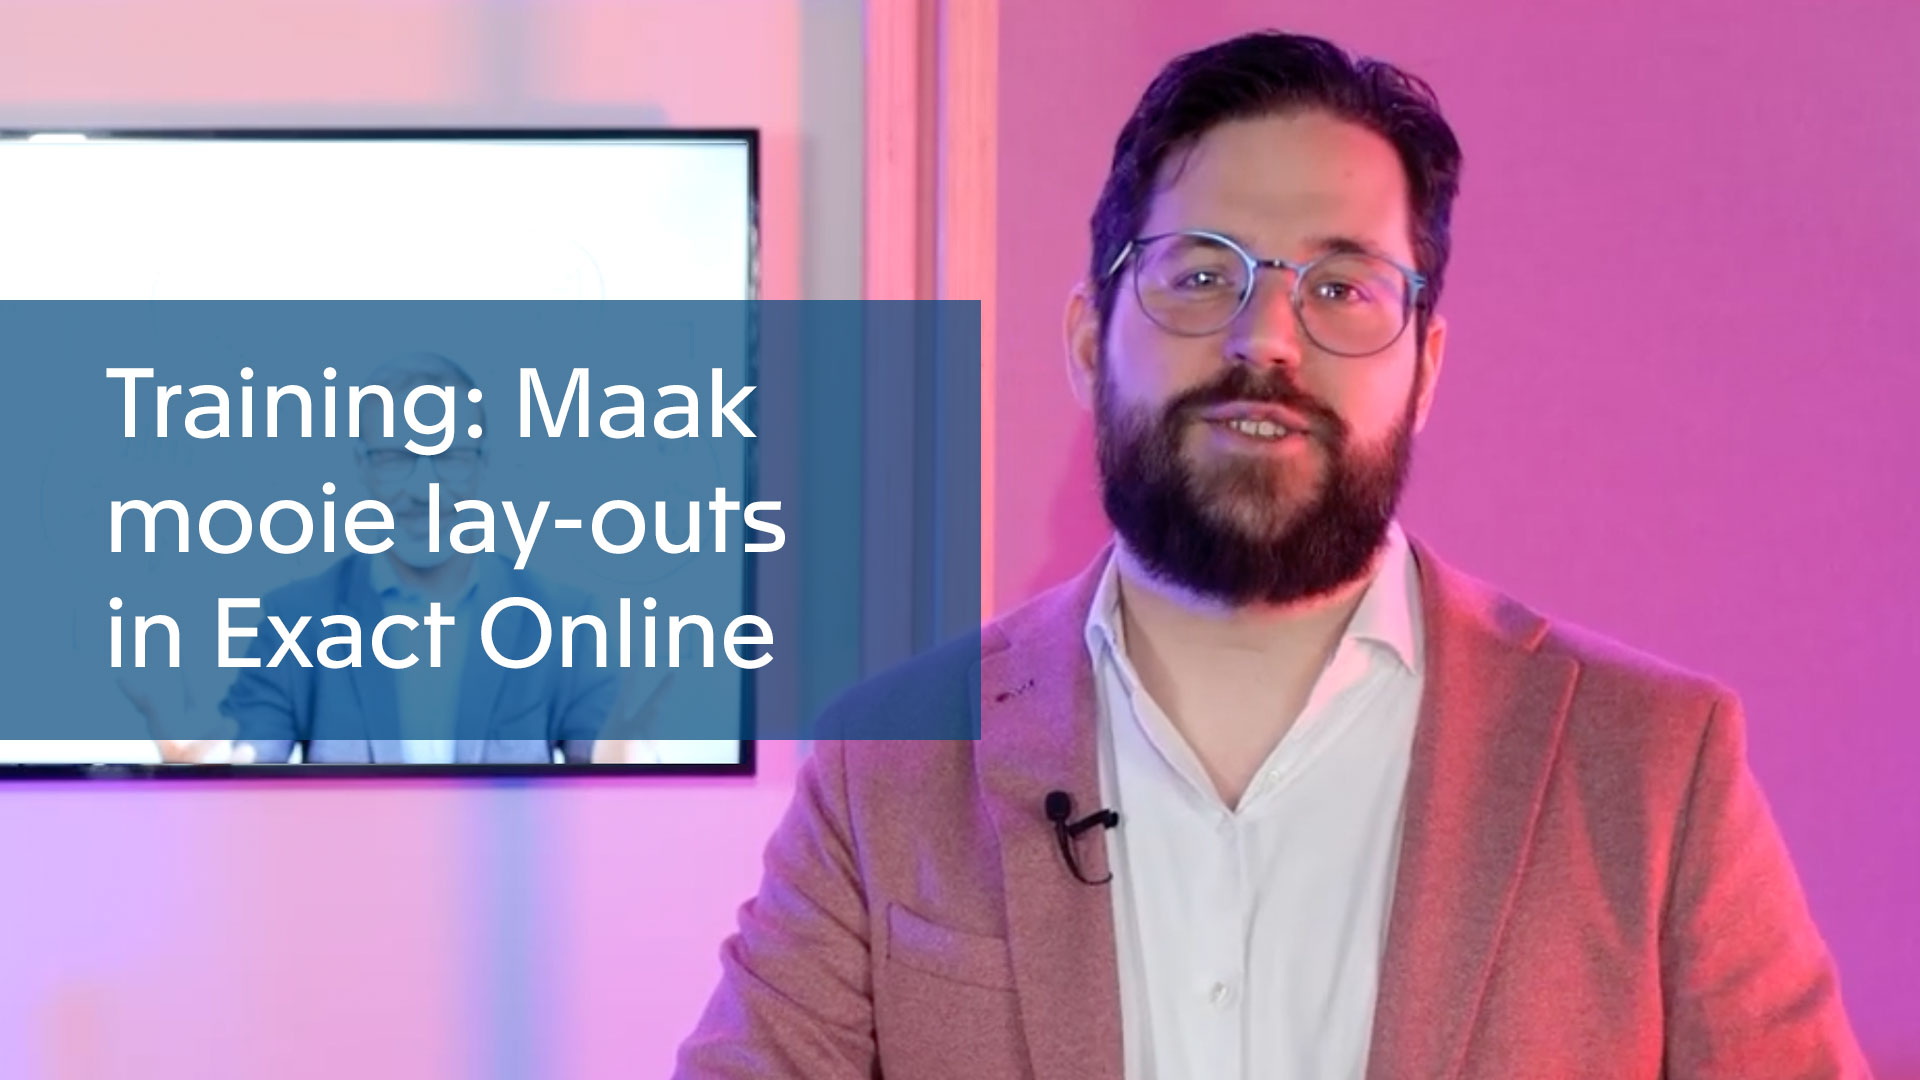 Training: Maak mooie lay-outs in Exact Online